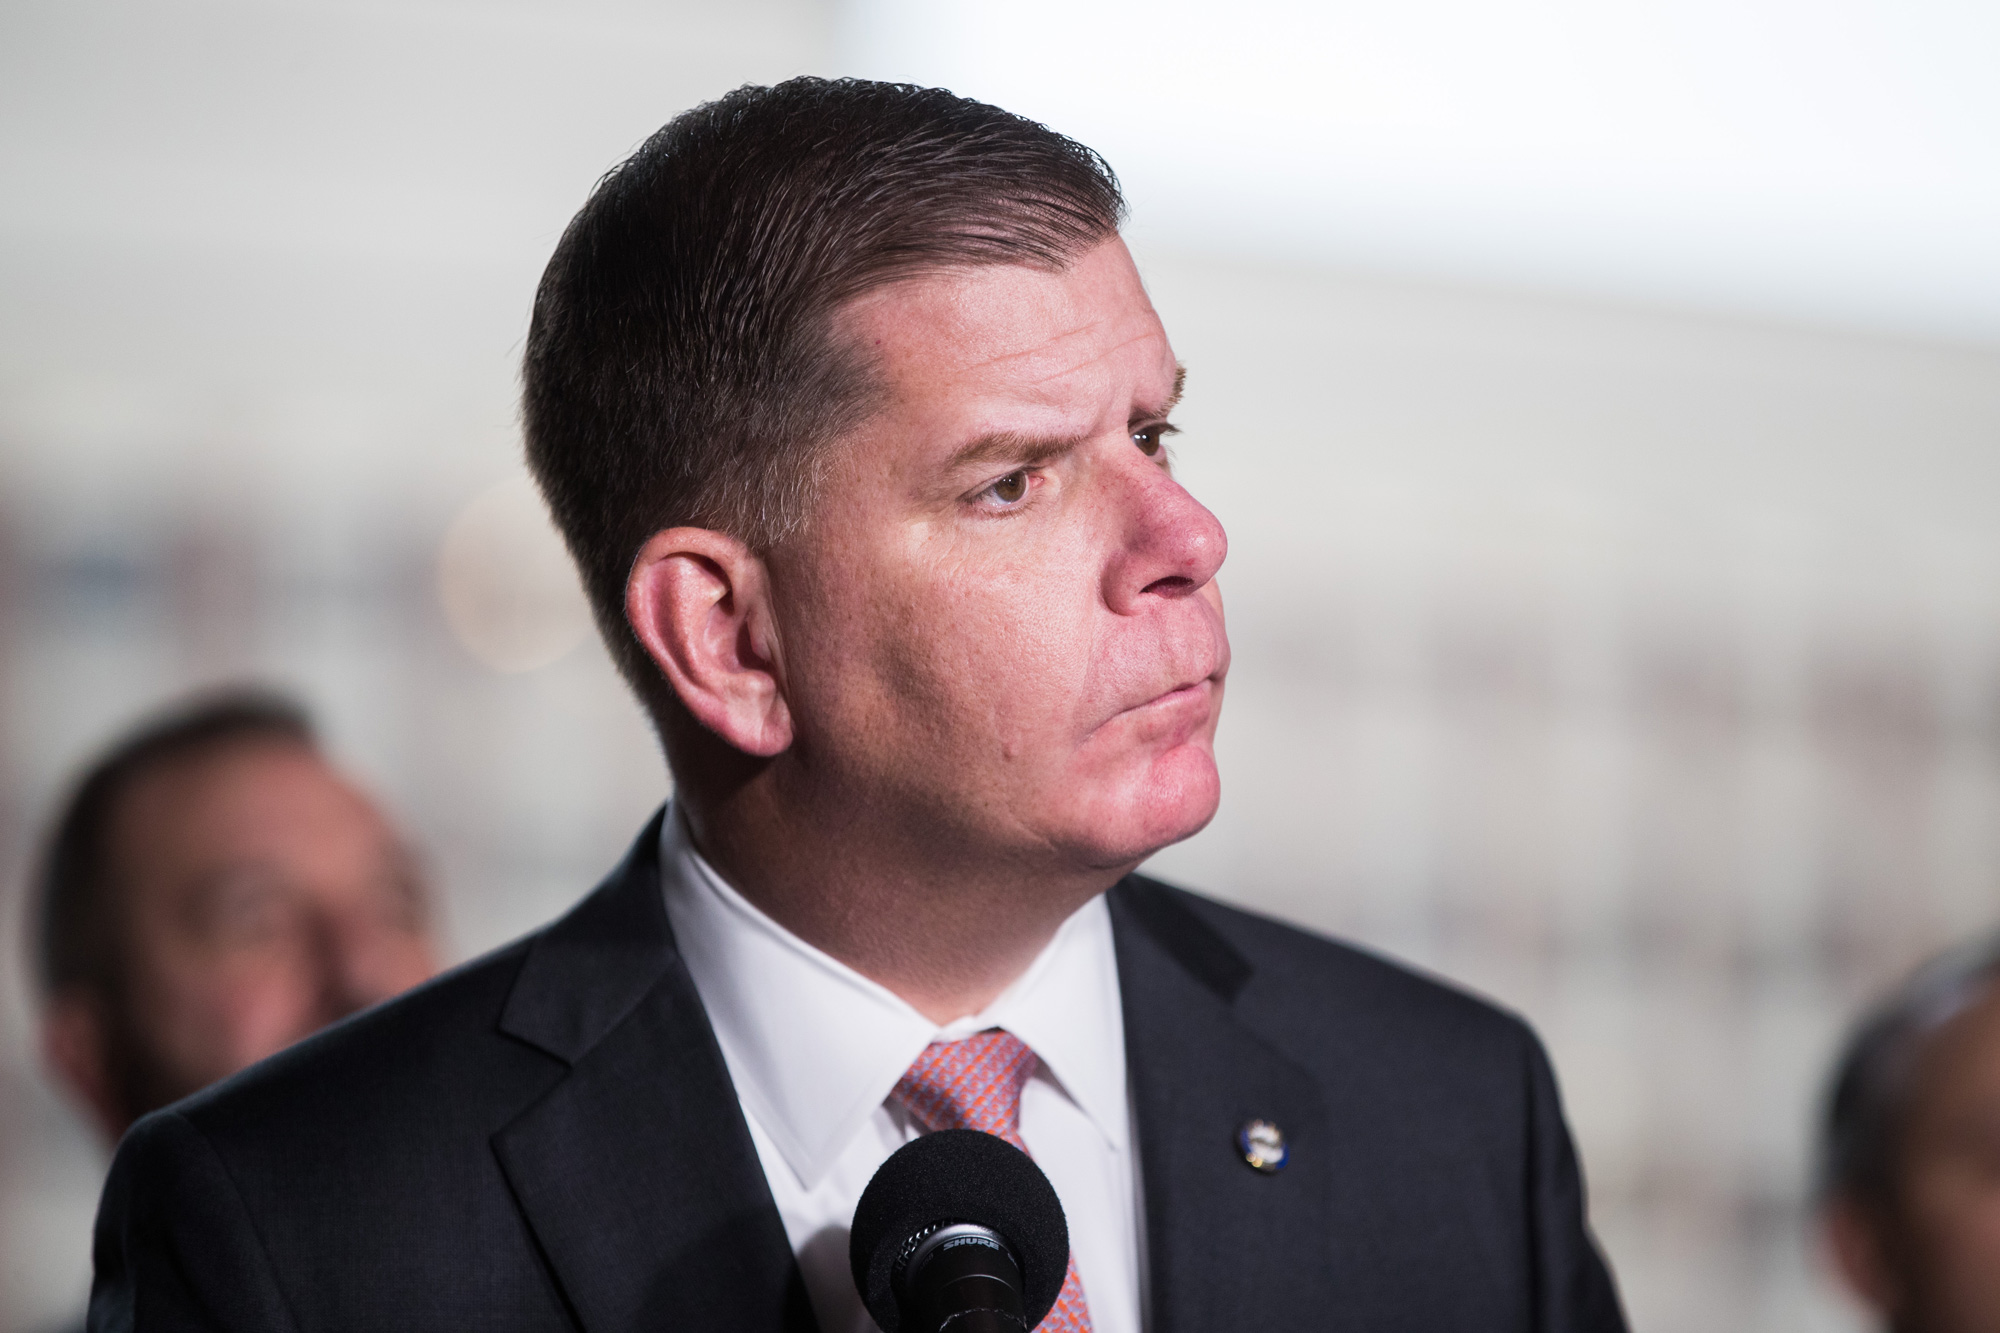 Boston Mayor Marty Walsh listens to a question at a press conference on March 13, 2020 in Boston.